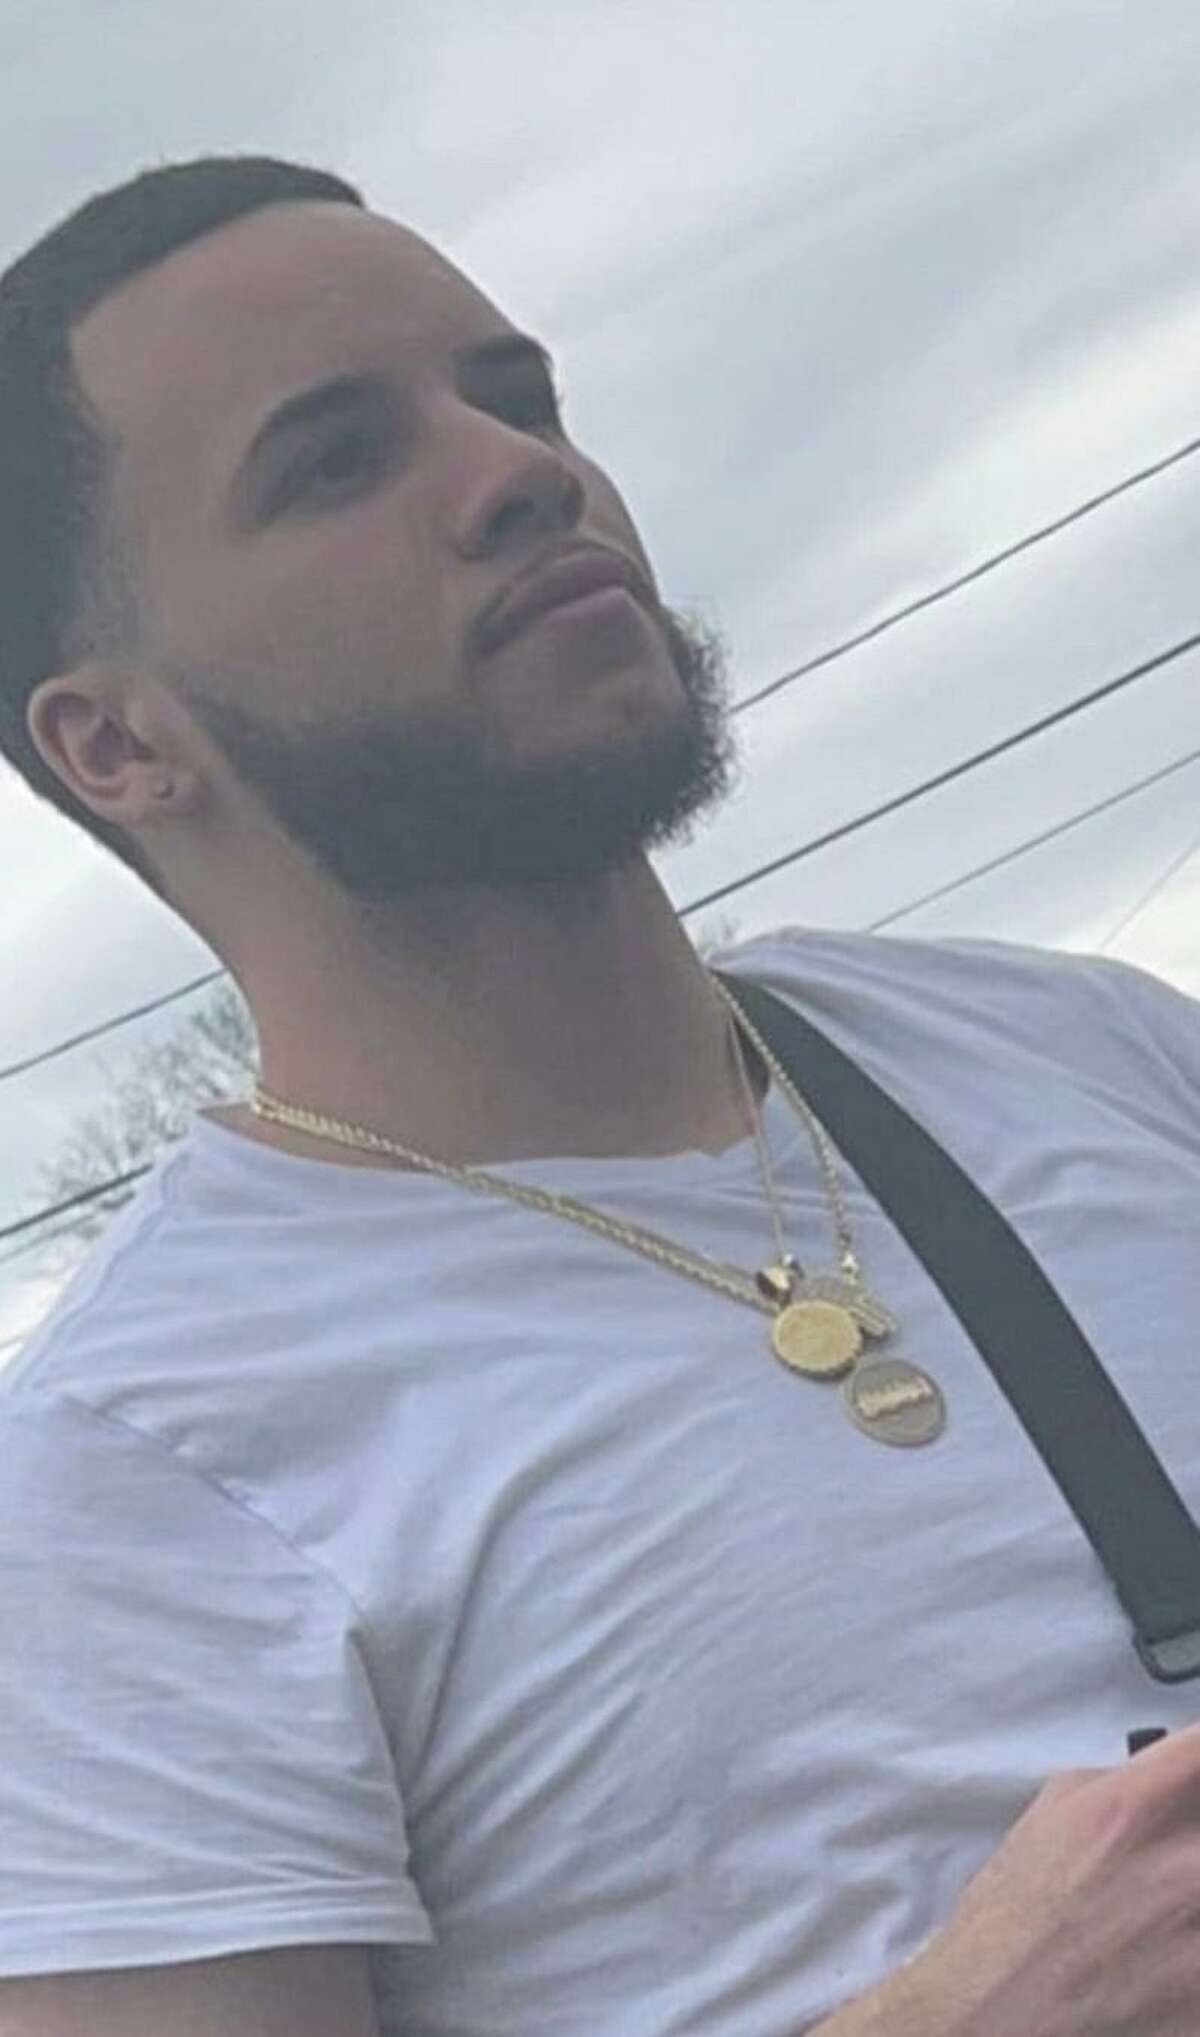 Carlos Reyes, 20, of Danbury, was last seen by family members on March 28. His vehicle was found ablaze and unoccupied Brewster, N.Y. the next day.